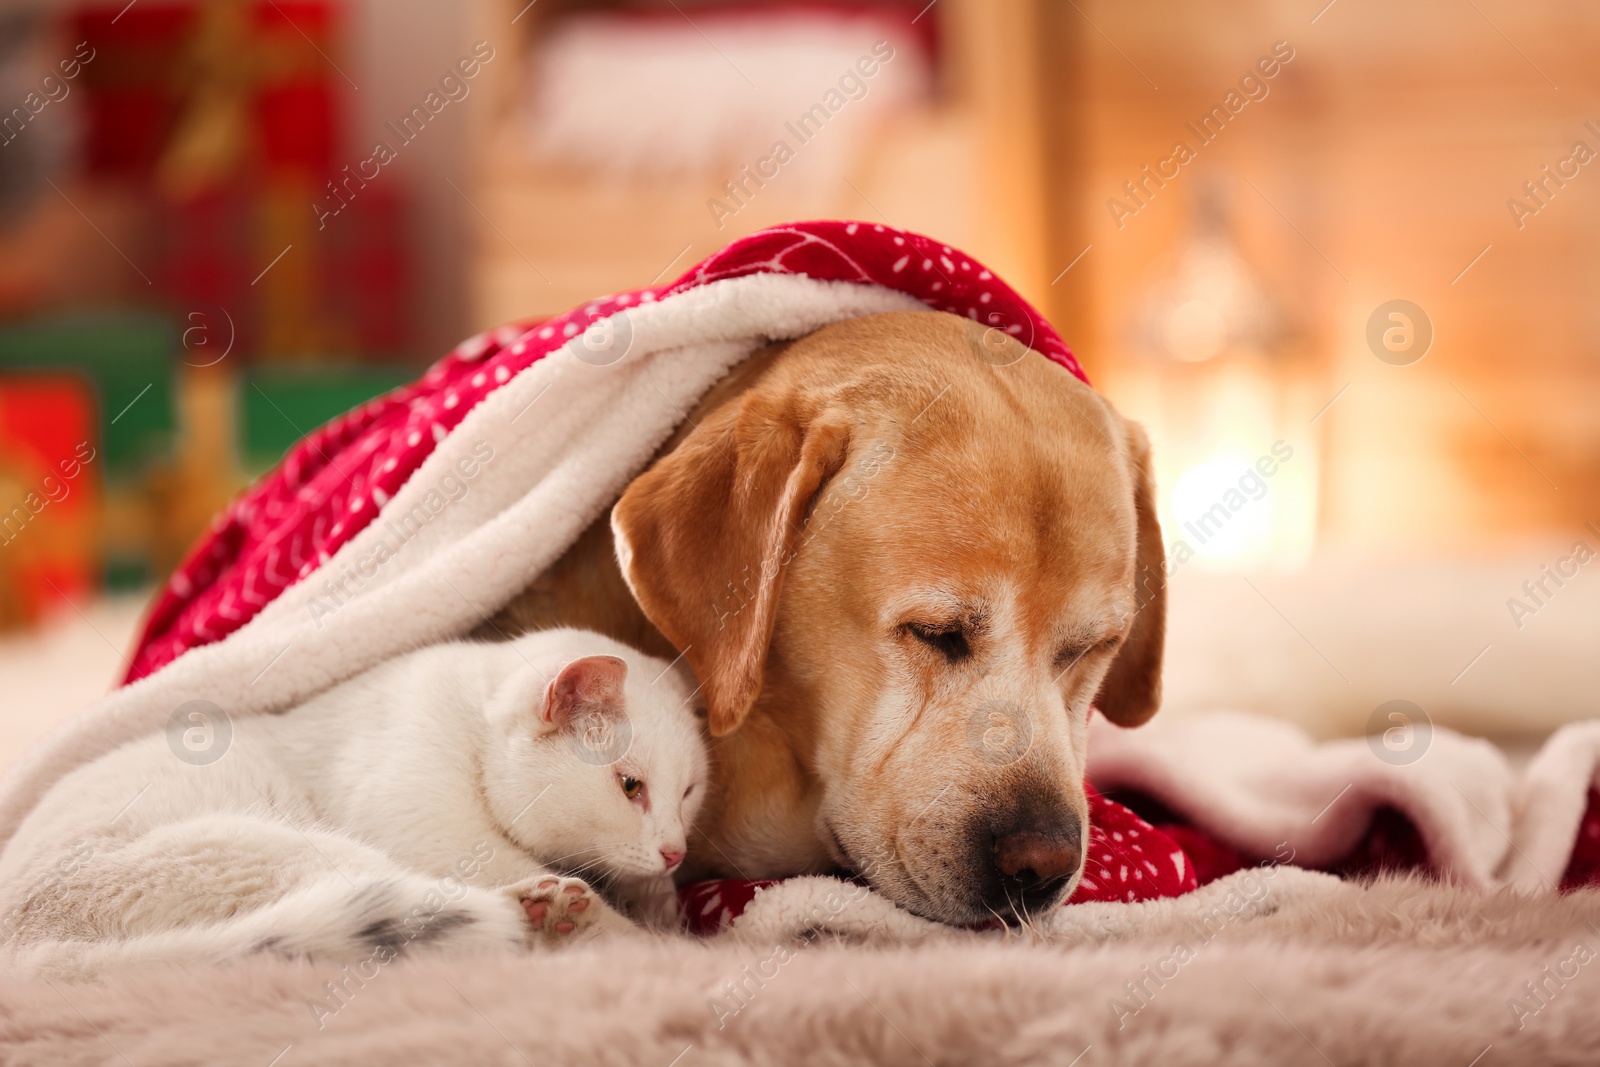 Photo of Adorable dog and cat together under blanket at room decorated for Christmas. Cute pets